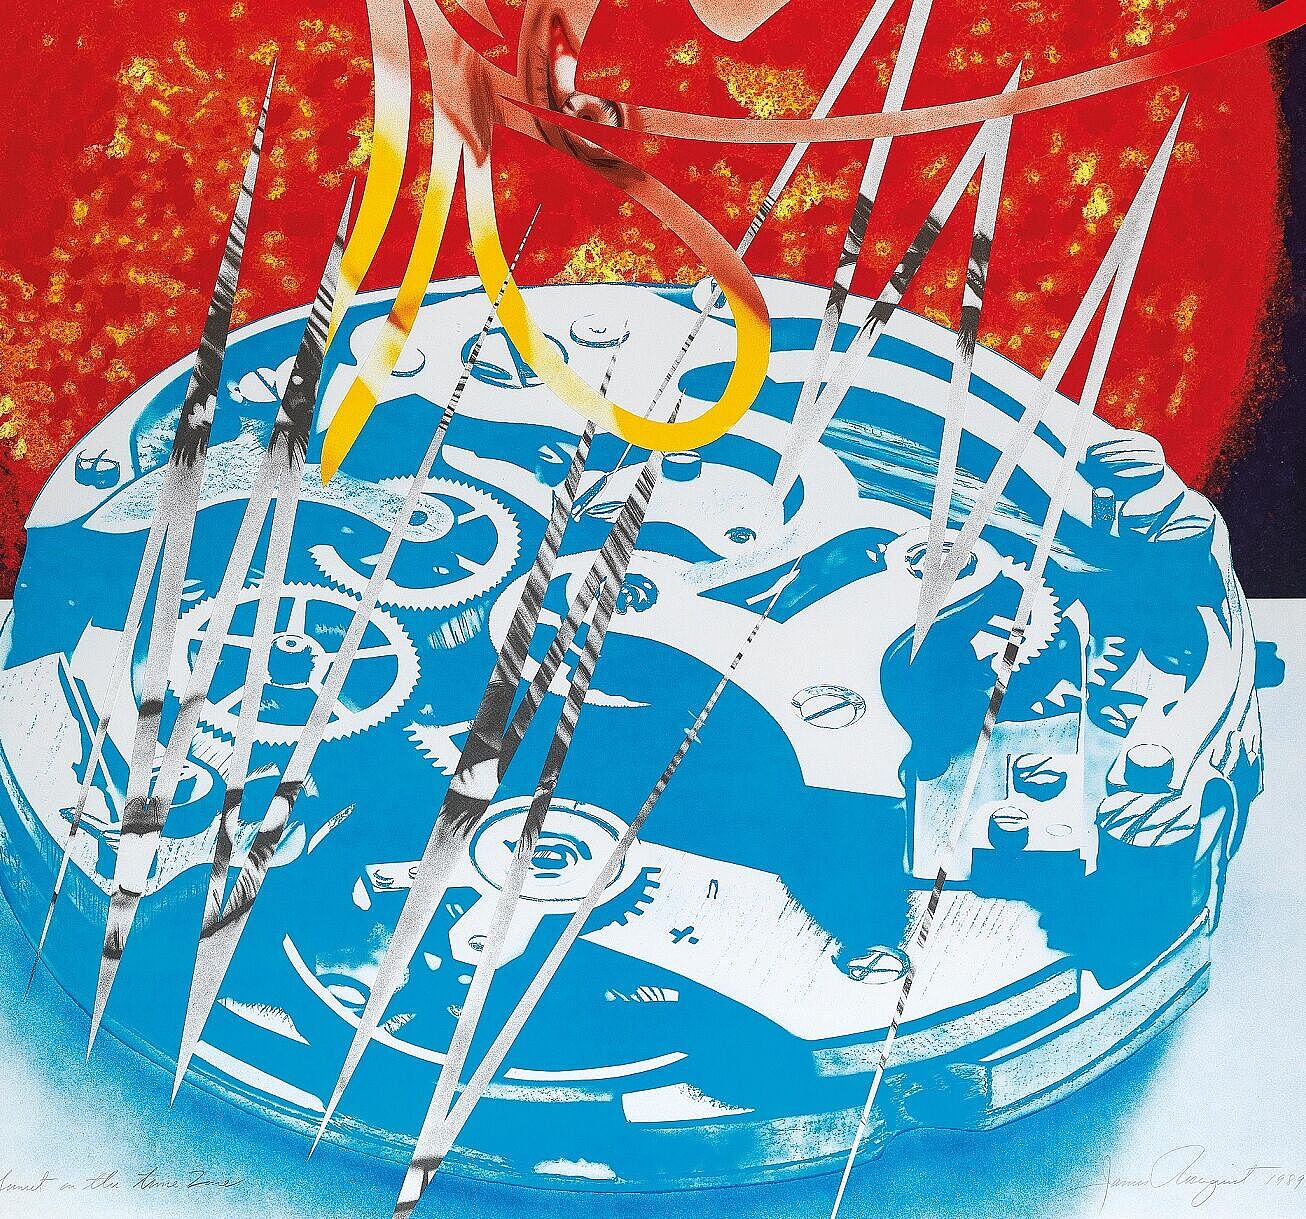 Colour lithograph and collage on paper by James Rosenquist: "Sunset in the Time Zone"